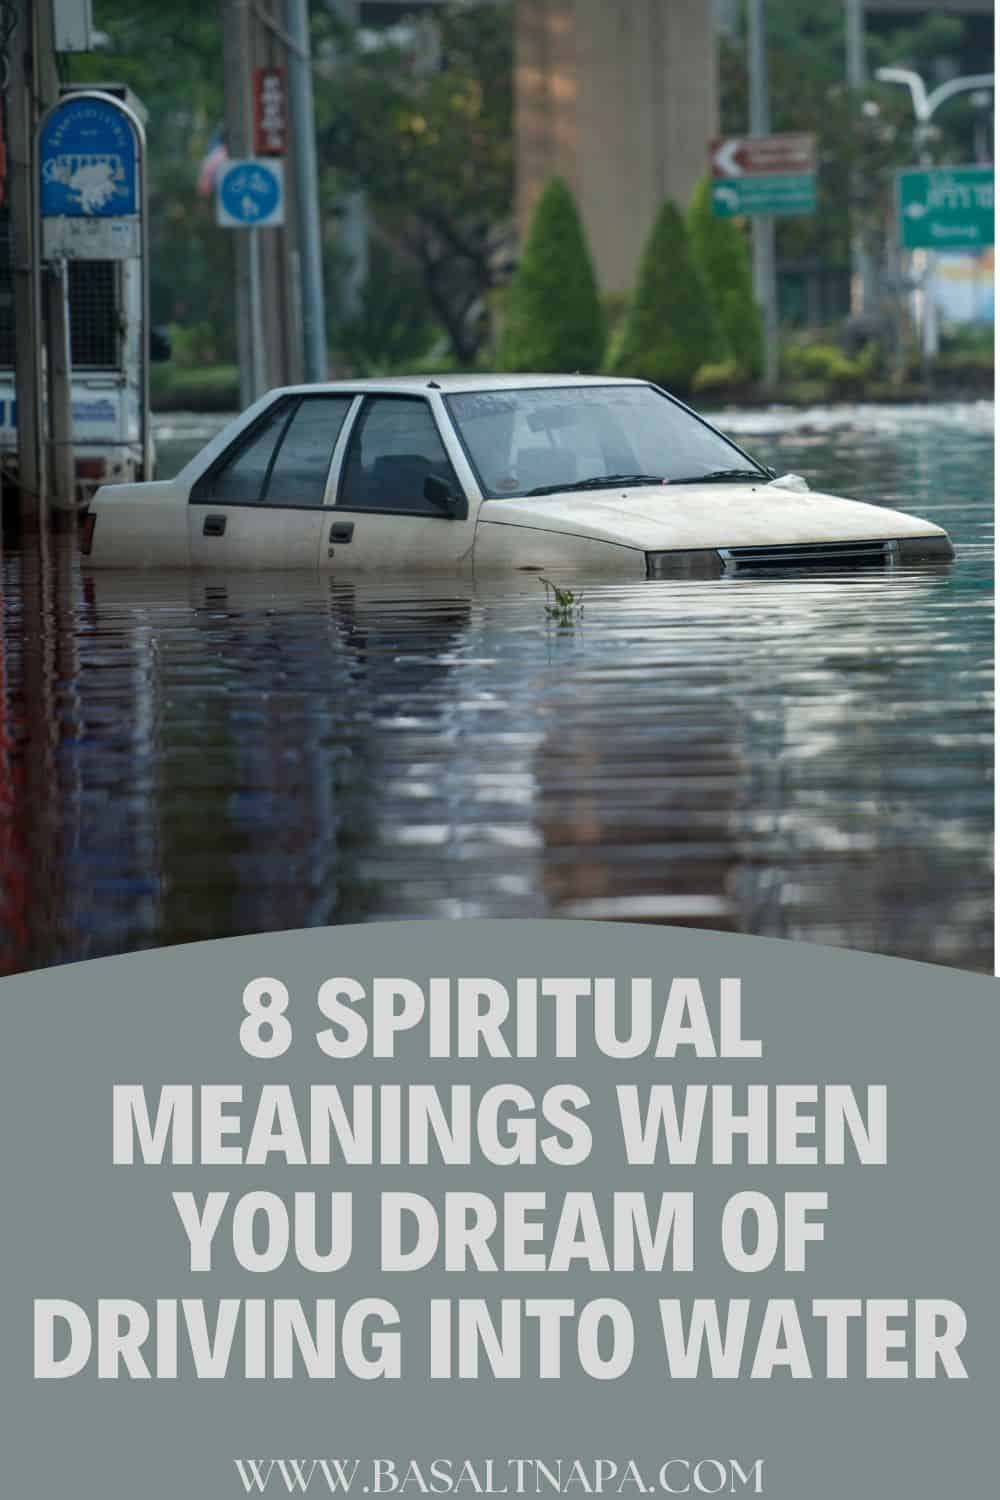 8 Spiritual Meanings When You Dream Of Driving Into Water